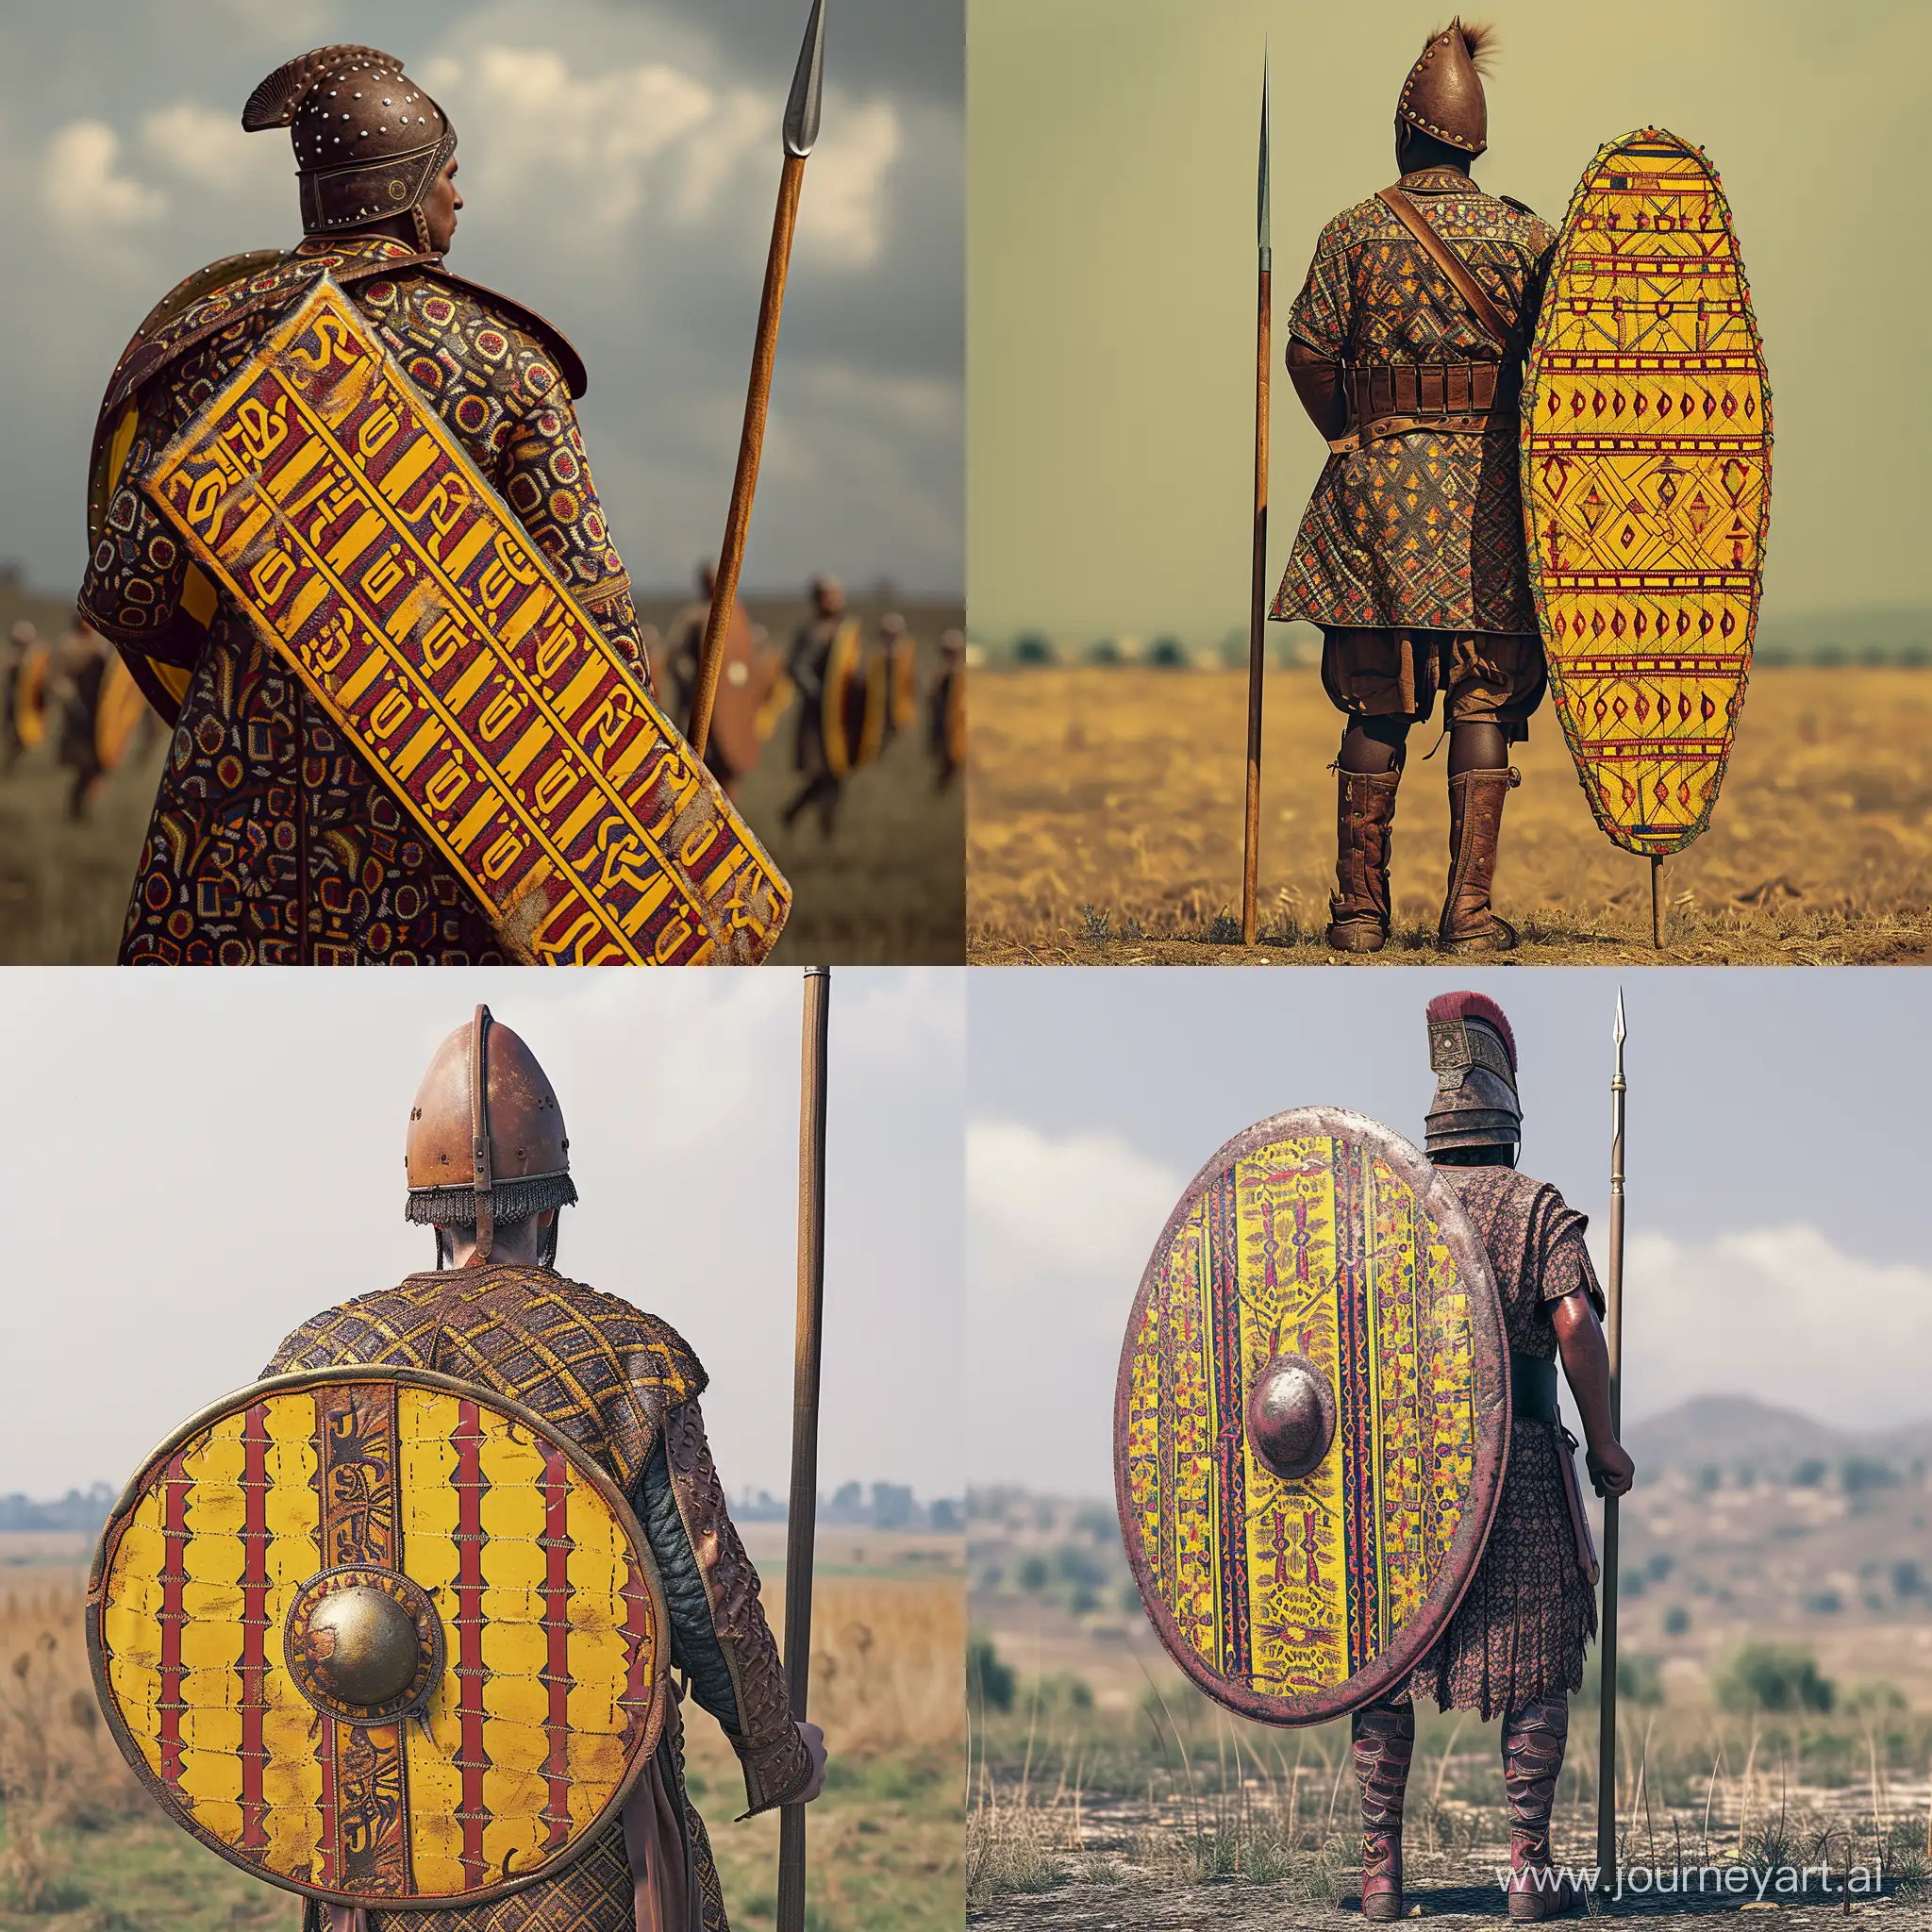 Achaemenid Sparabara soldier at battle field. Wearing patterned leather tunic and leather hat. Equipping big yellow-red patterned rectangle shield and a long spear. Realistic image.